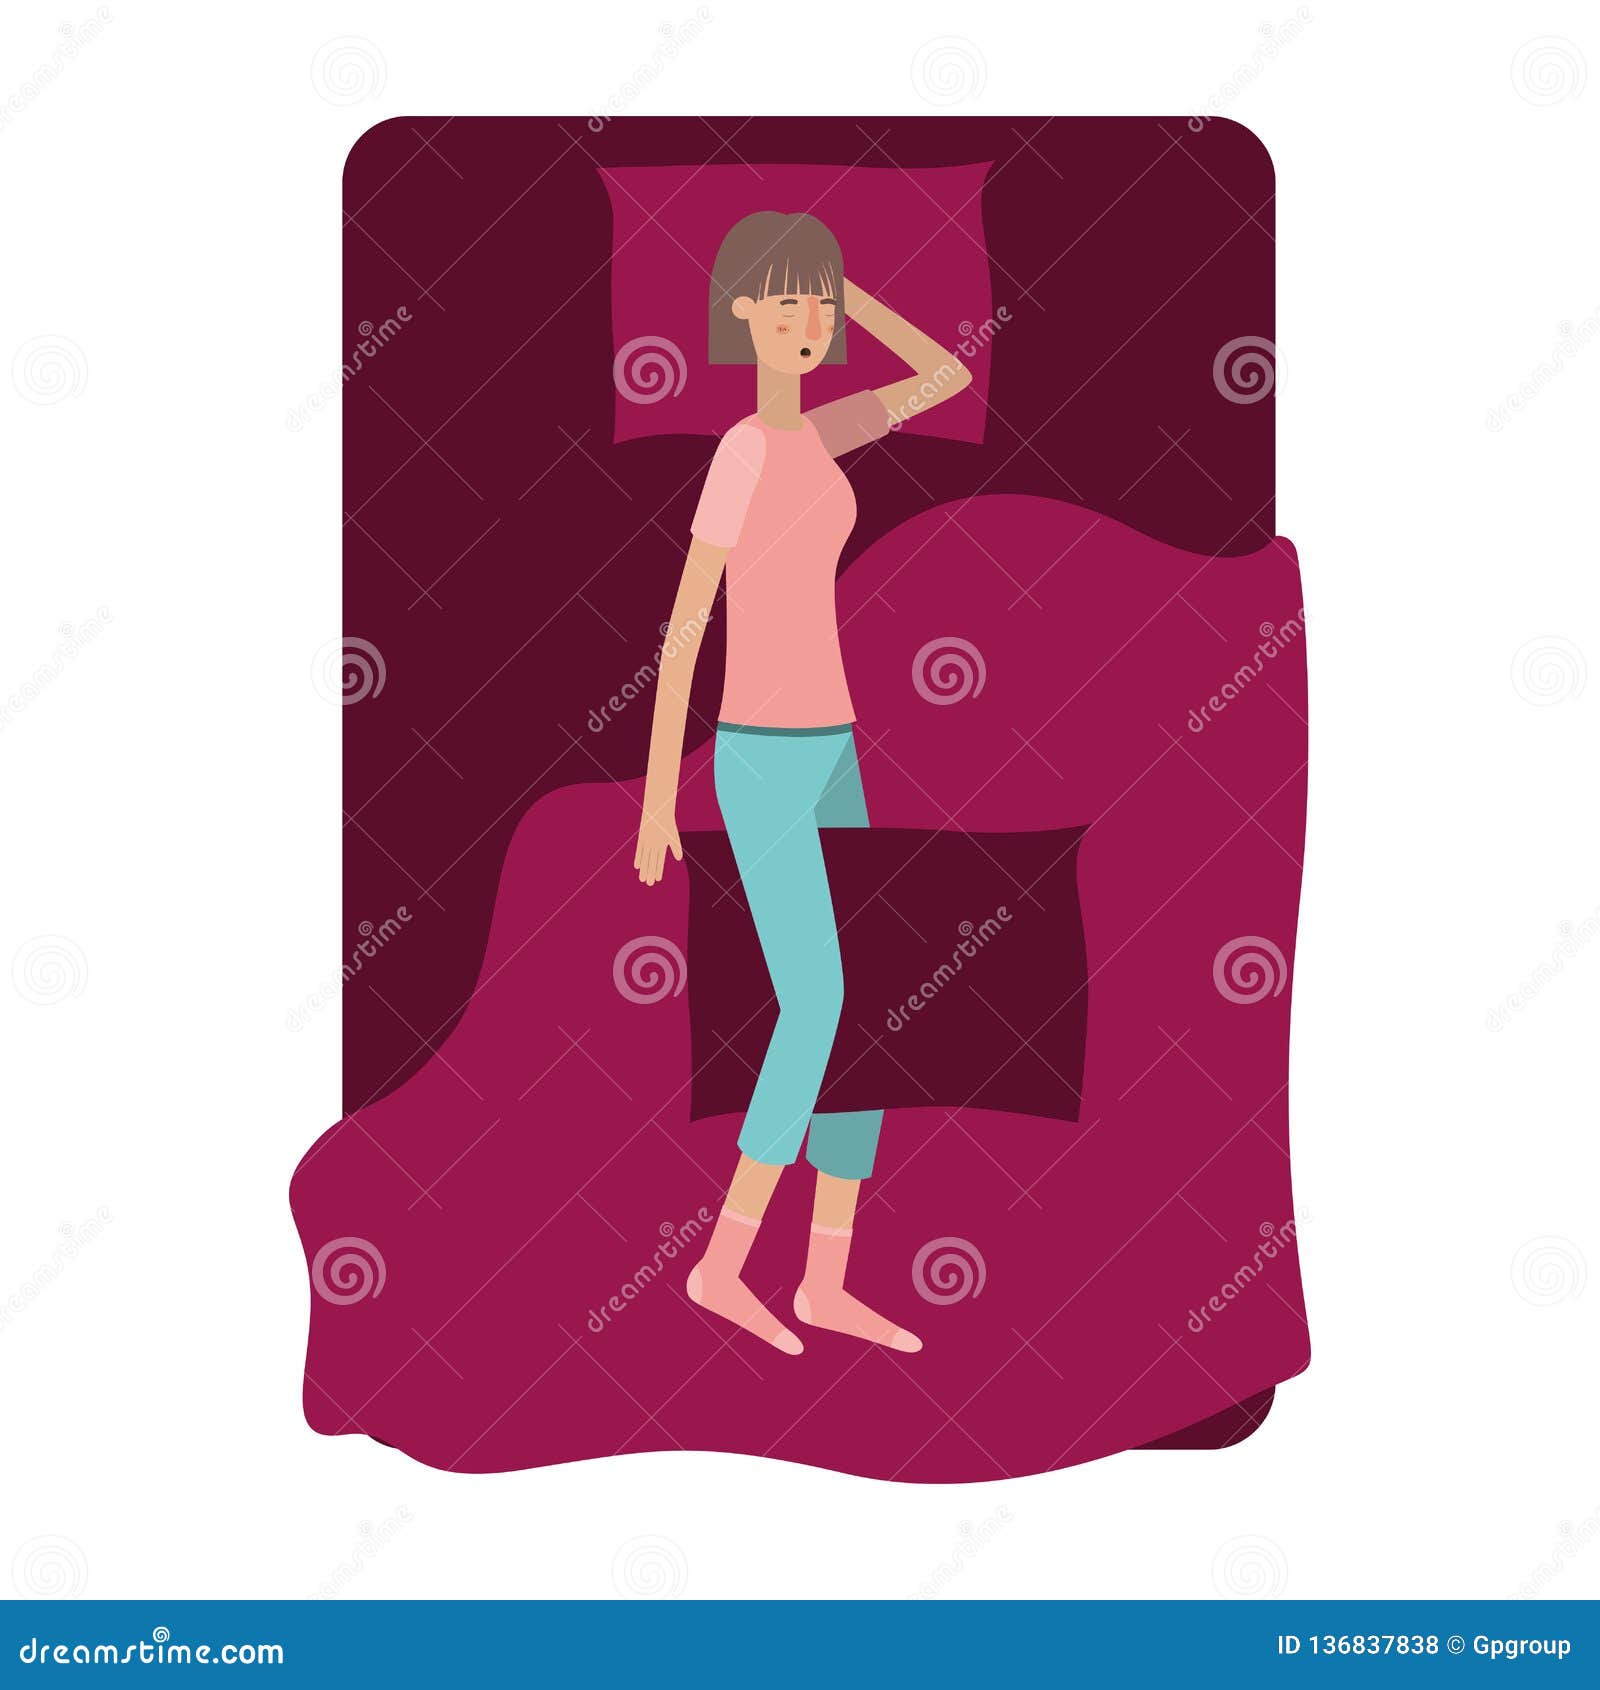 Young Woman in Bed Avatar Character Stock Vector - Illustration of ...